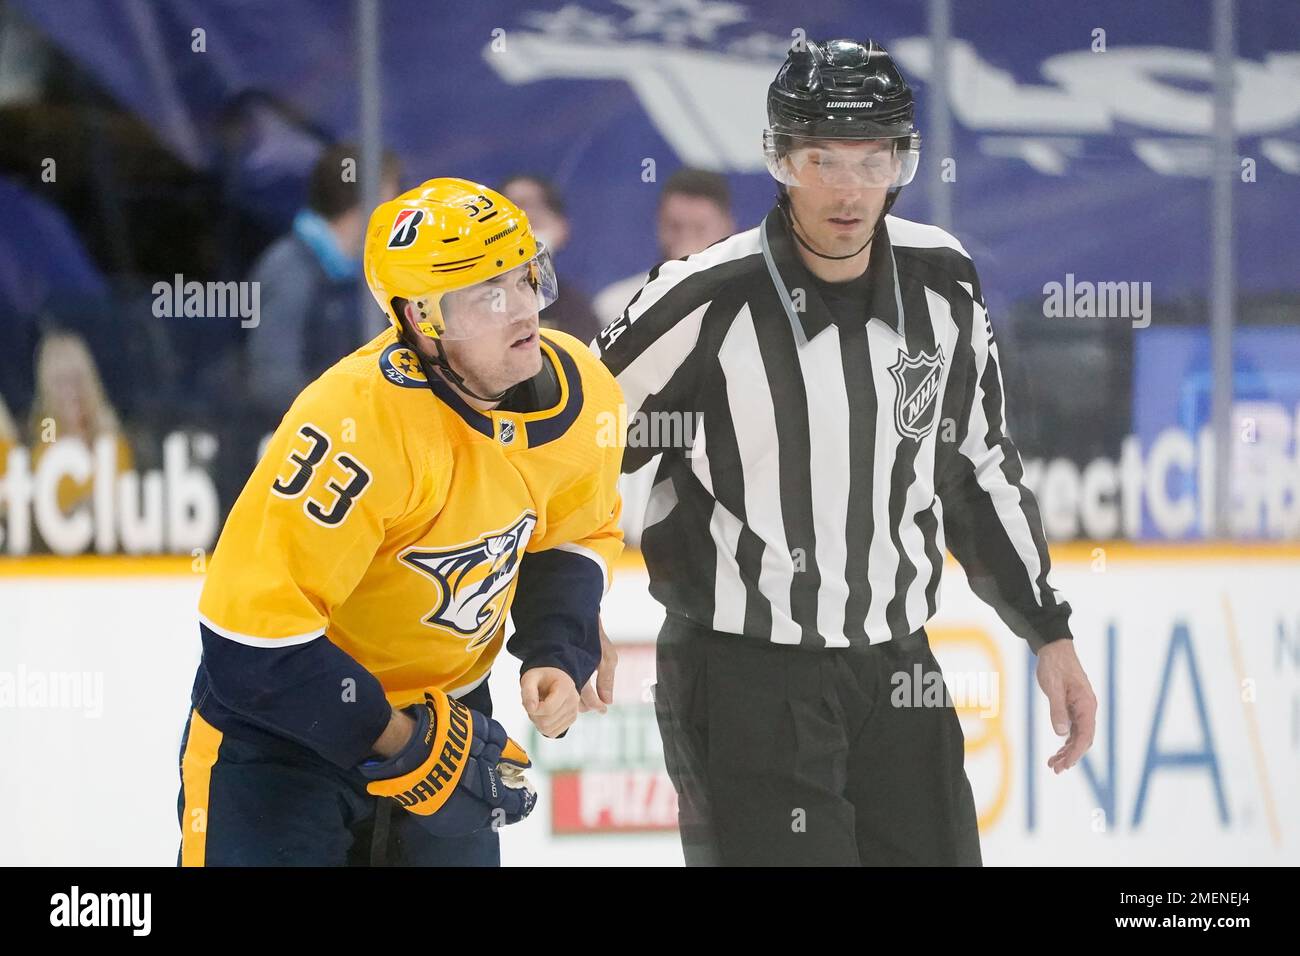 Warrior Hockey on X: Something tells us the NHL Officials are